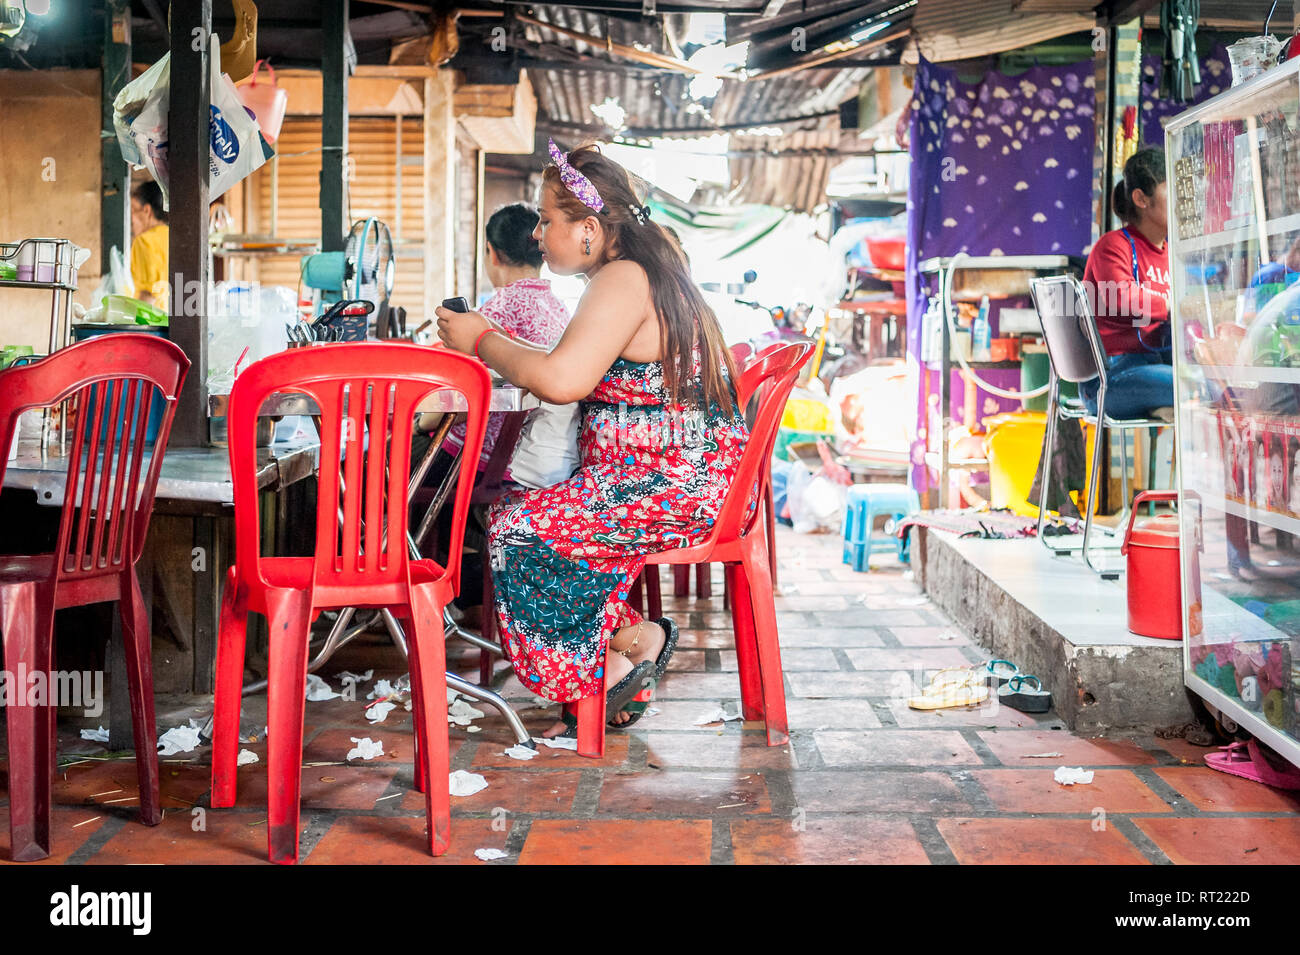 A young lady enjoys her lunch at a noodle stall in a busy indoor market in Phnom Penh Cambodia. Stock Photo